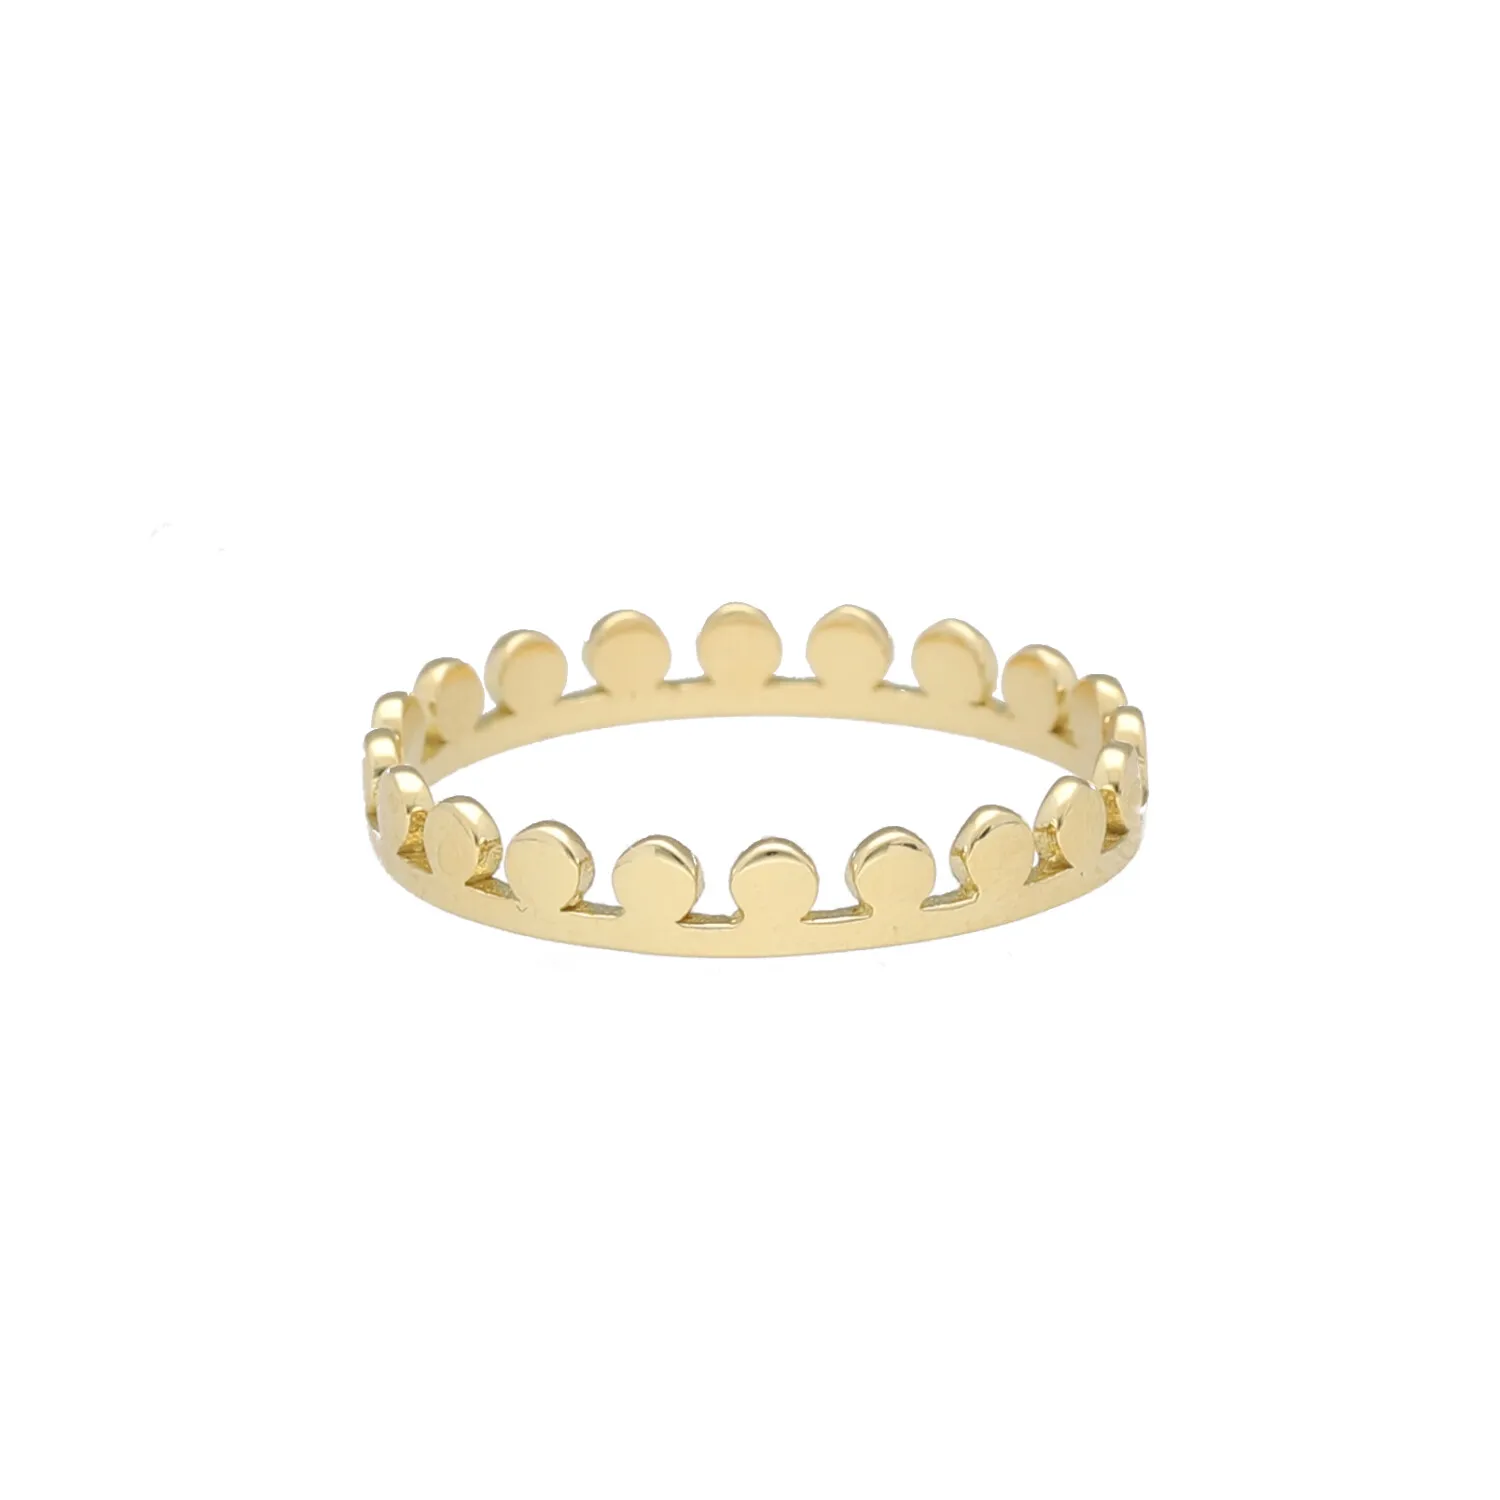 Gold Crown ring for men and women in high quality gold.